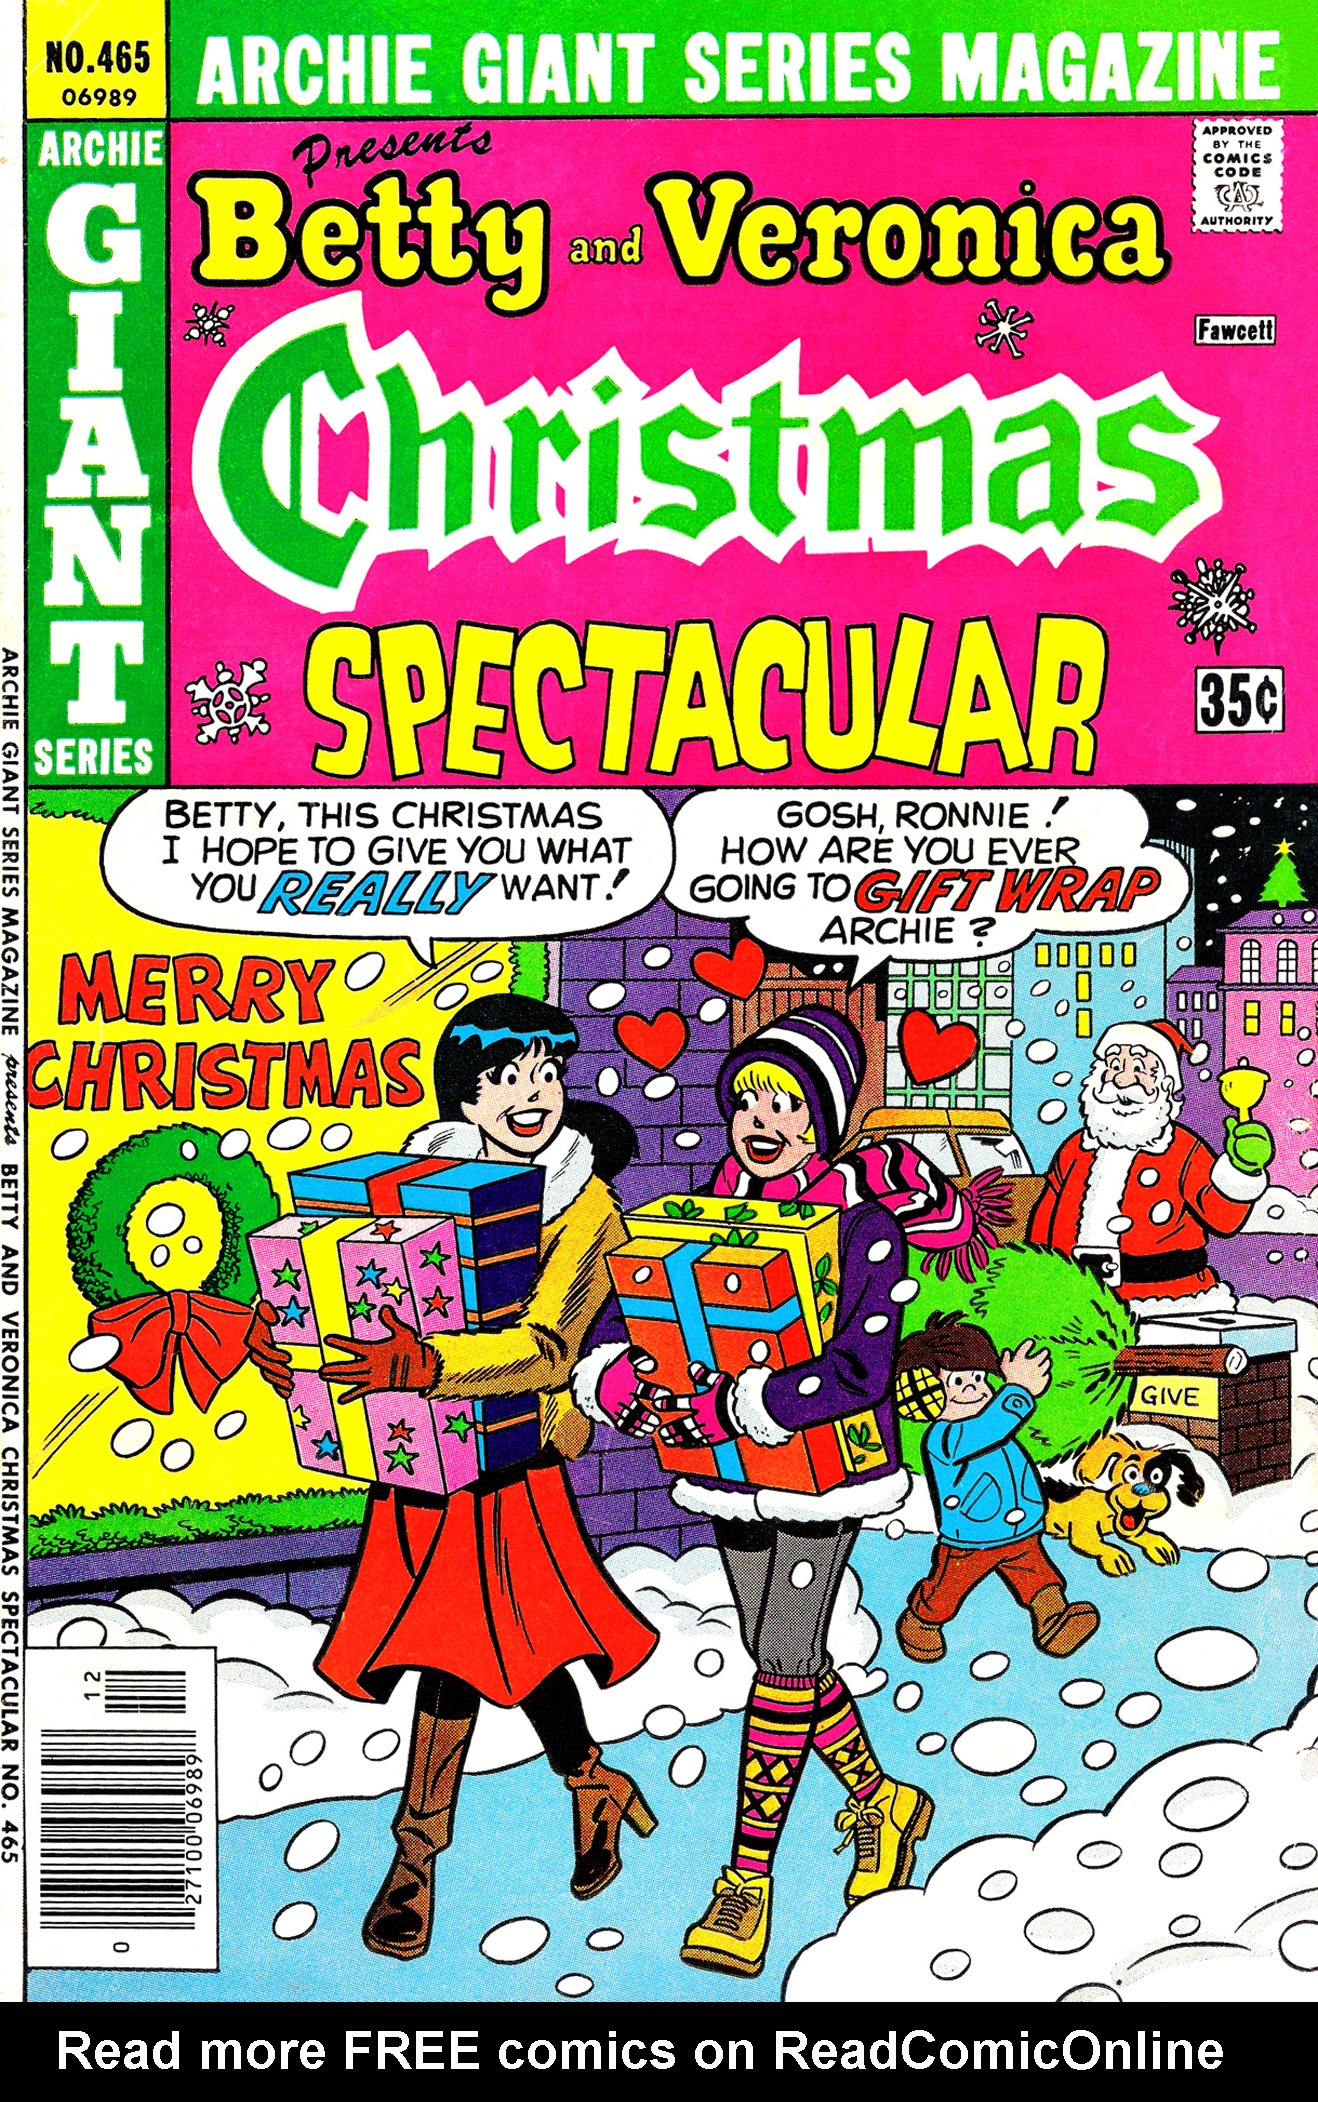 Read online Archie Giant Series Magazine comic -  Issue #465 - 1